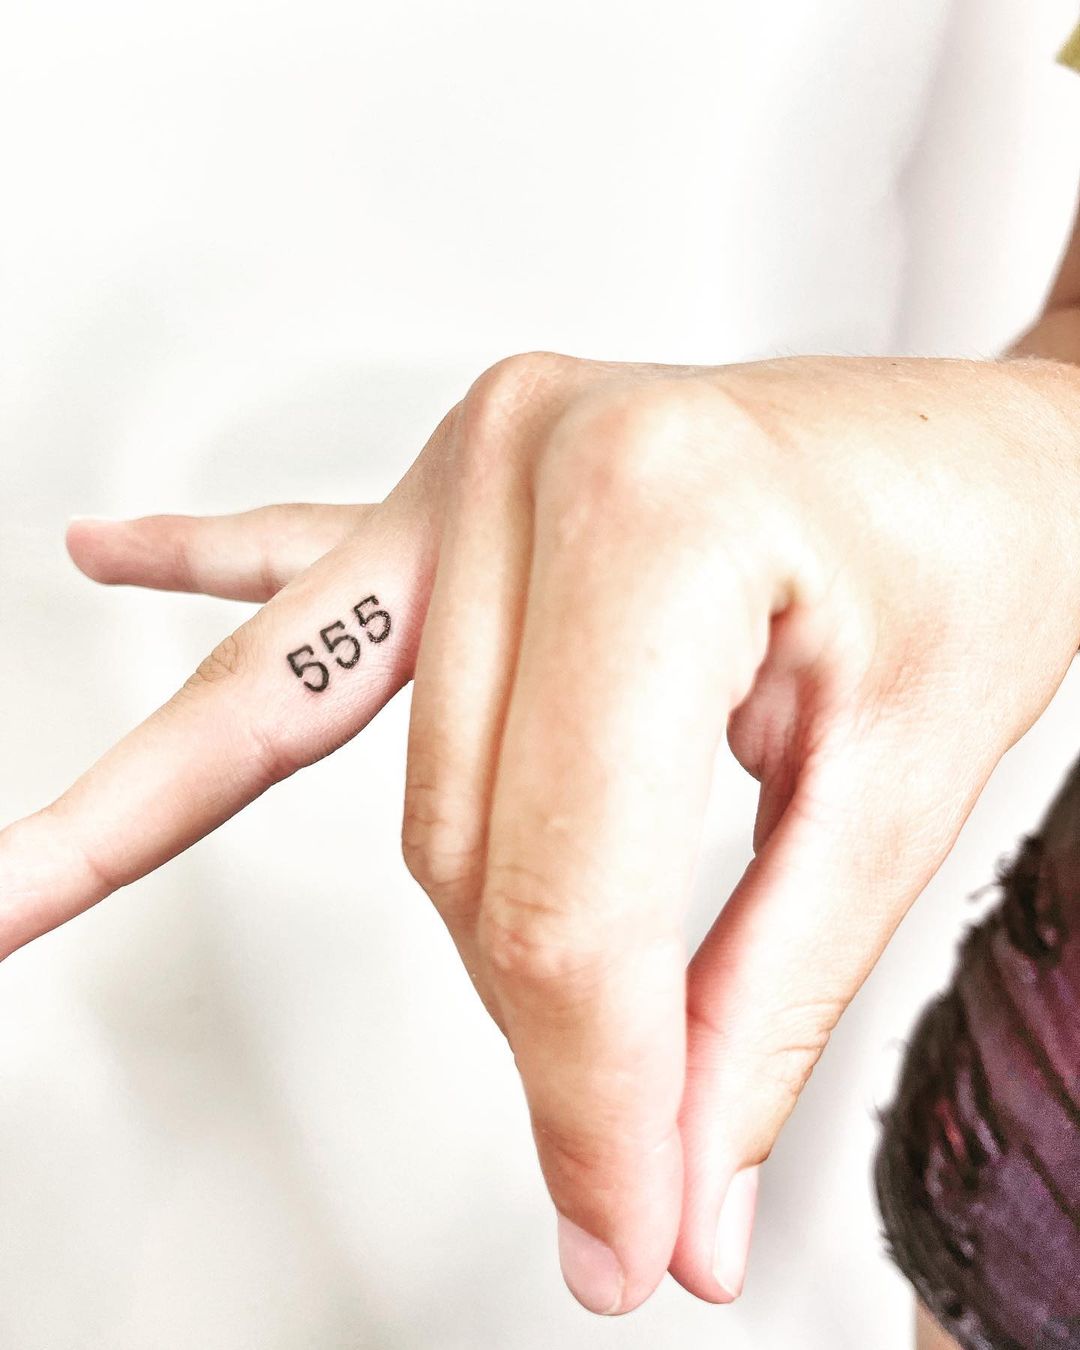 555 tattoo on the finger